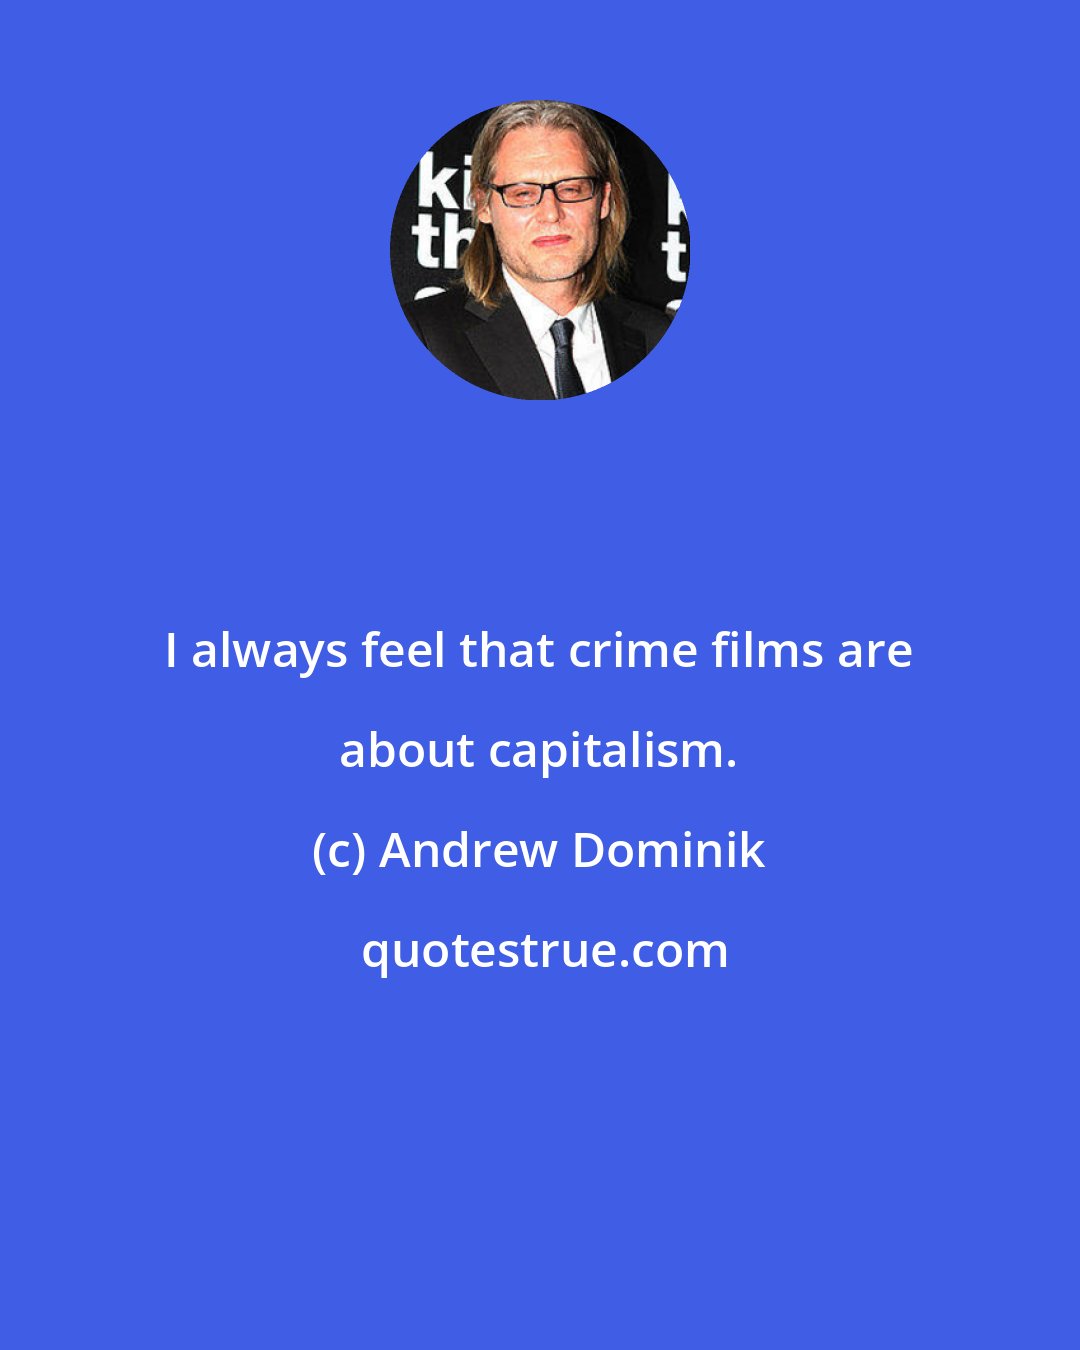 Andrew Dominik: I always feel that crime films are about capitalism.